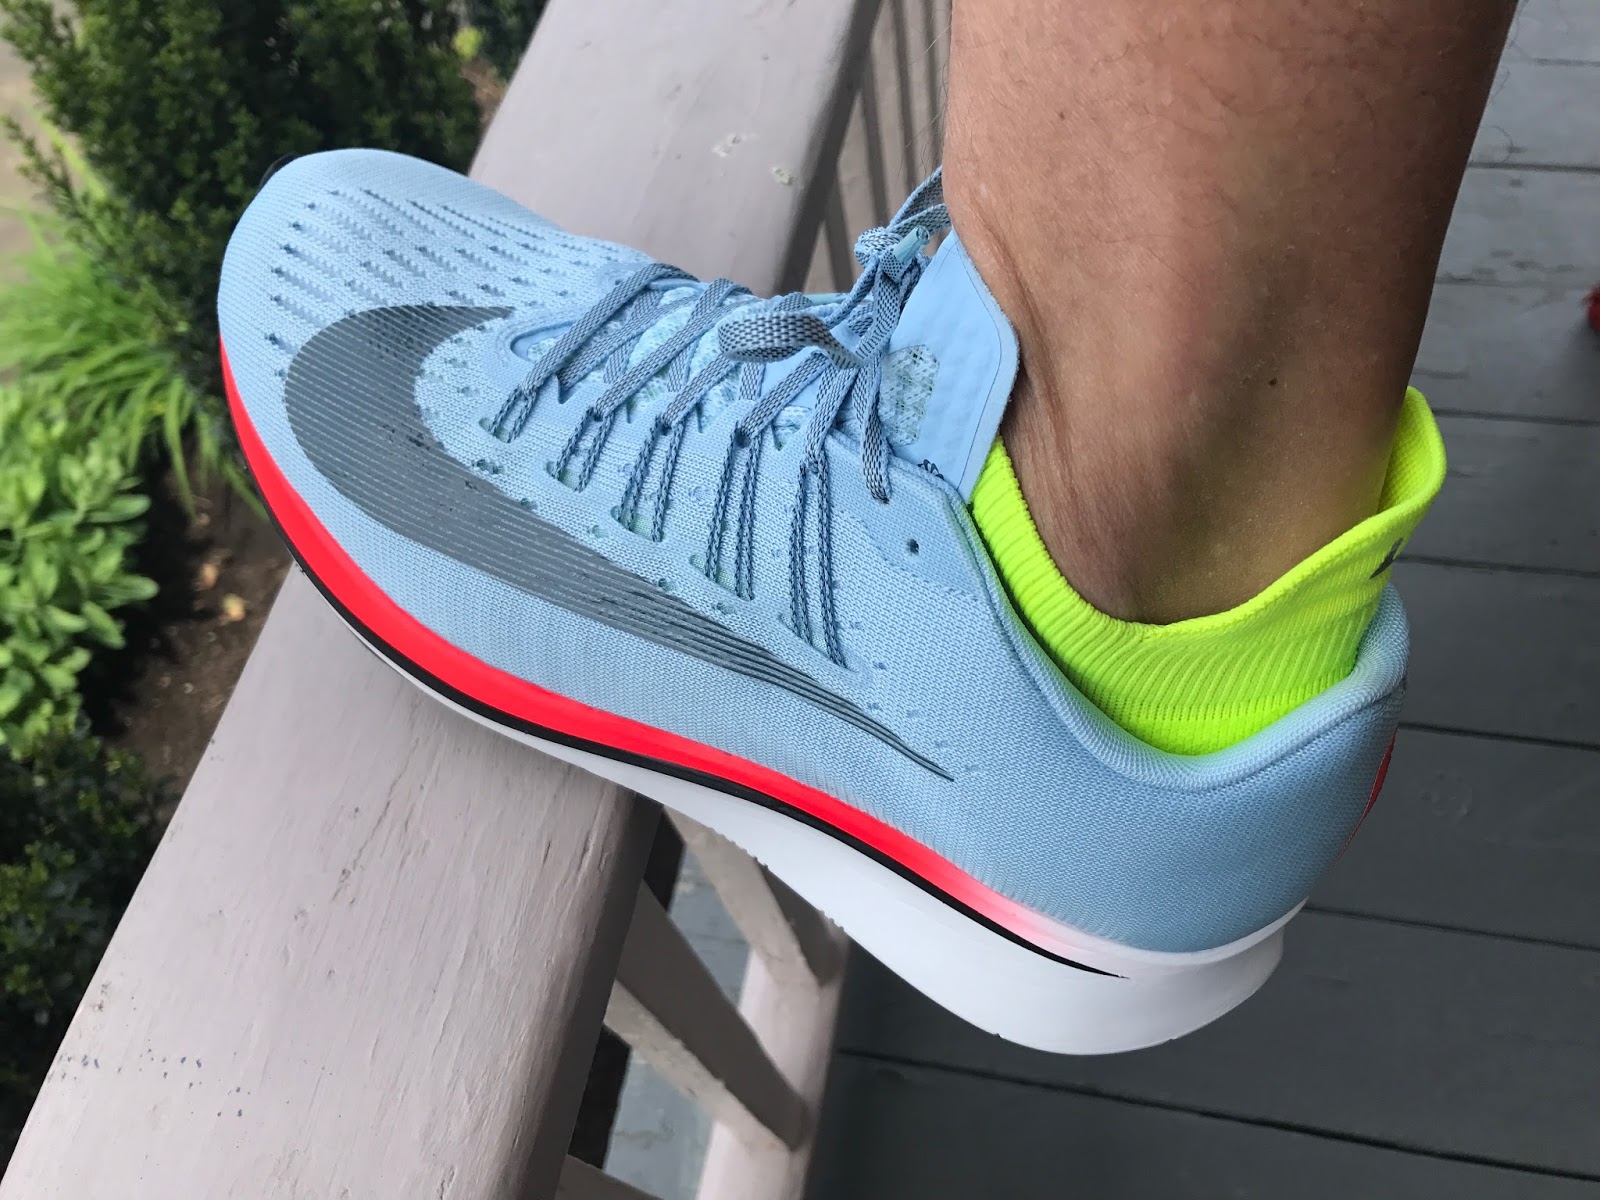 A tiempo Suavemente República Road Trail Run: Nike Zoom Fly Flyknit Initial Road Test Review: Zoom Fly  2.5%?